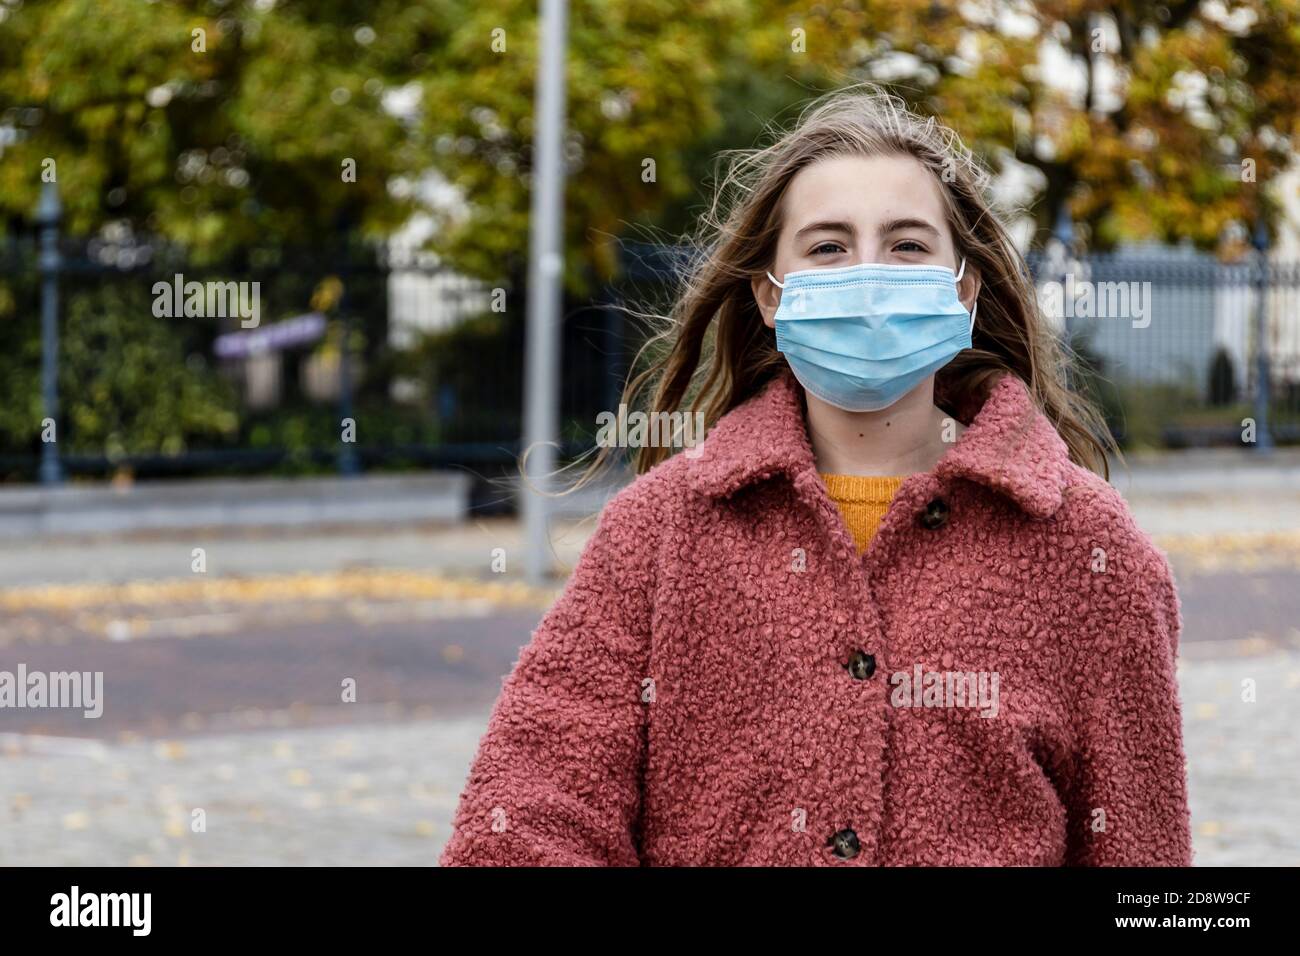 Blonde girl in pink winter coat walking with confidence on a city street wearing a face mask for Corona virus pandemic. Stock Photo